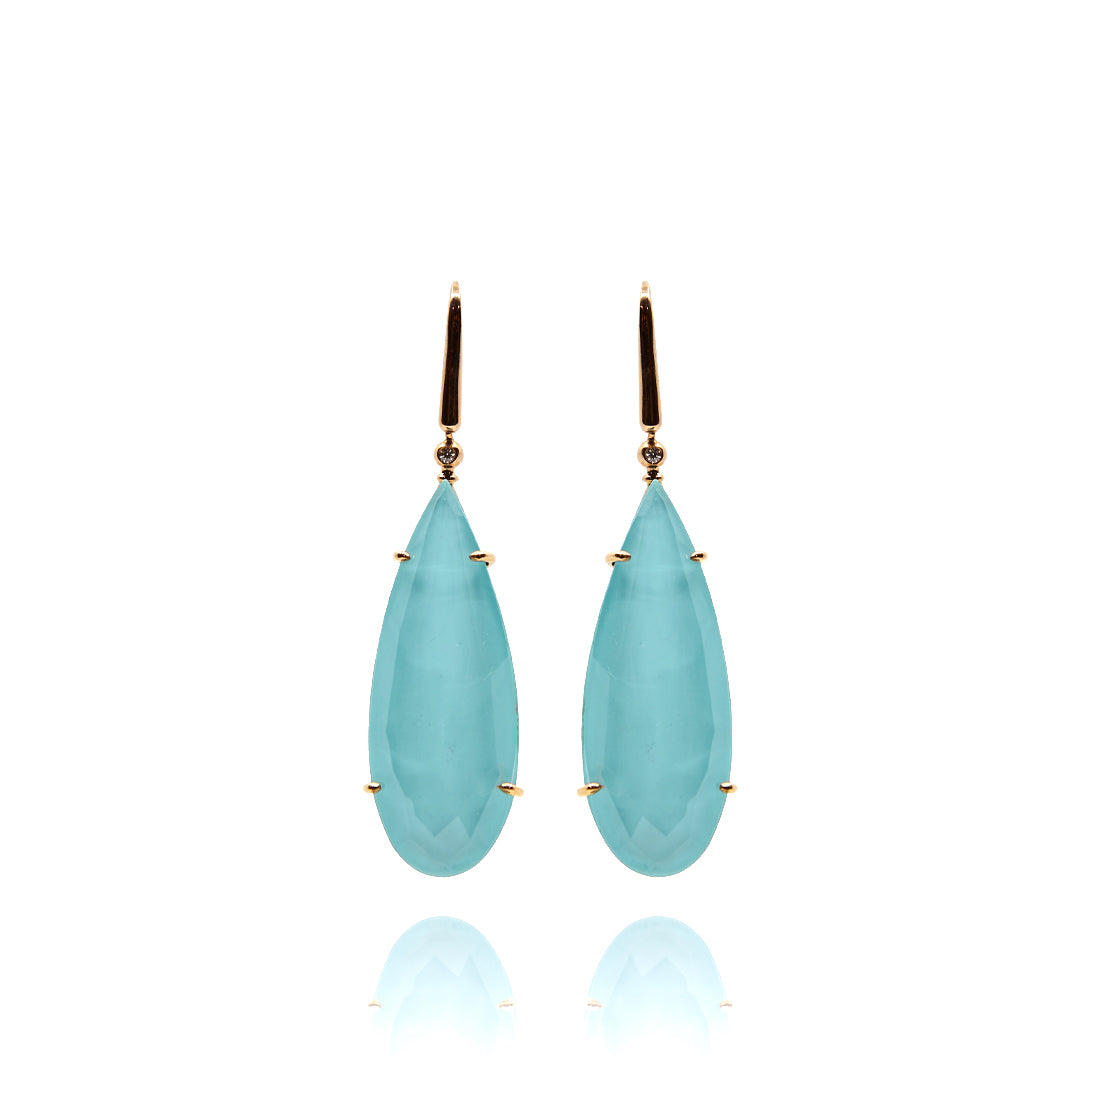 Rose gold earrings with turquoise 